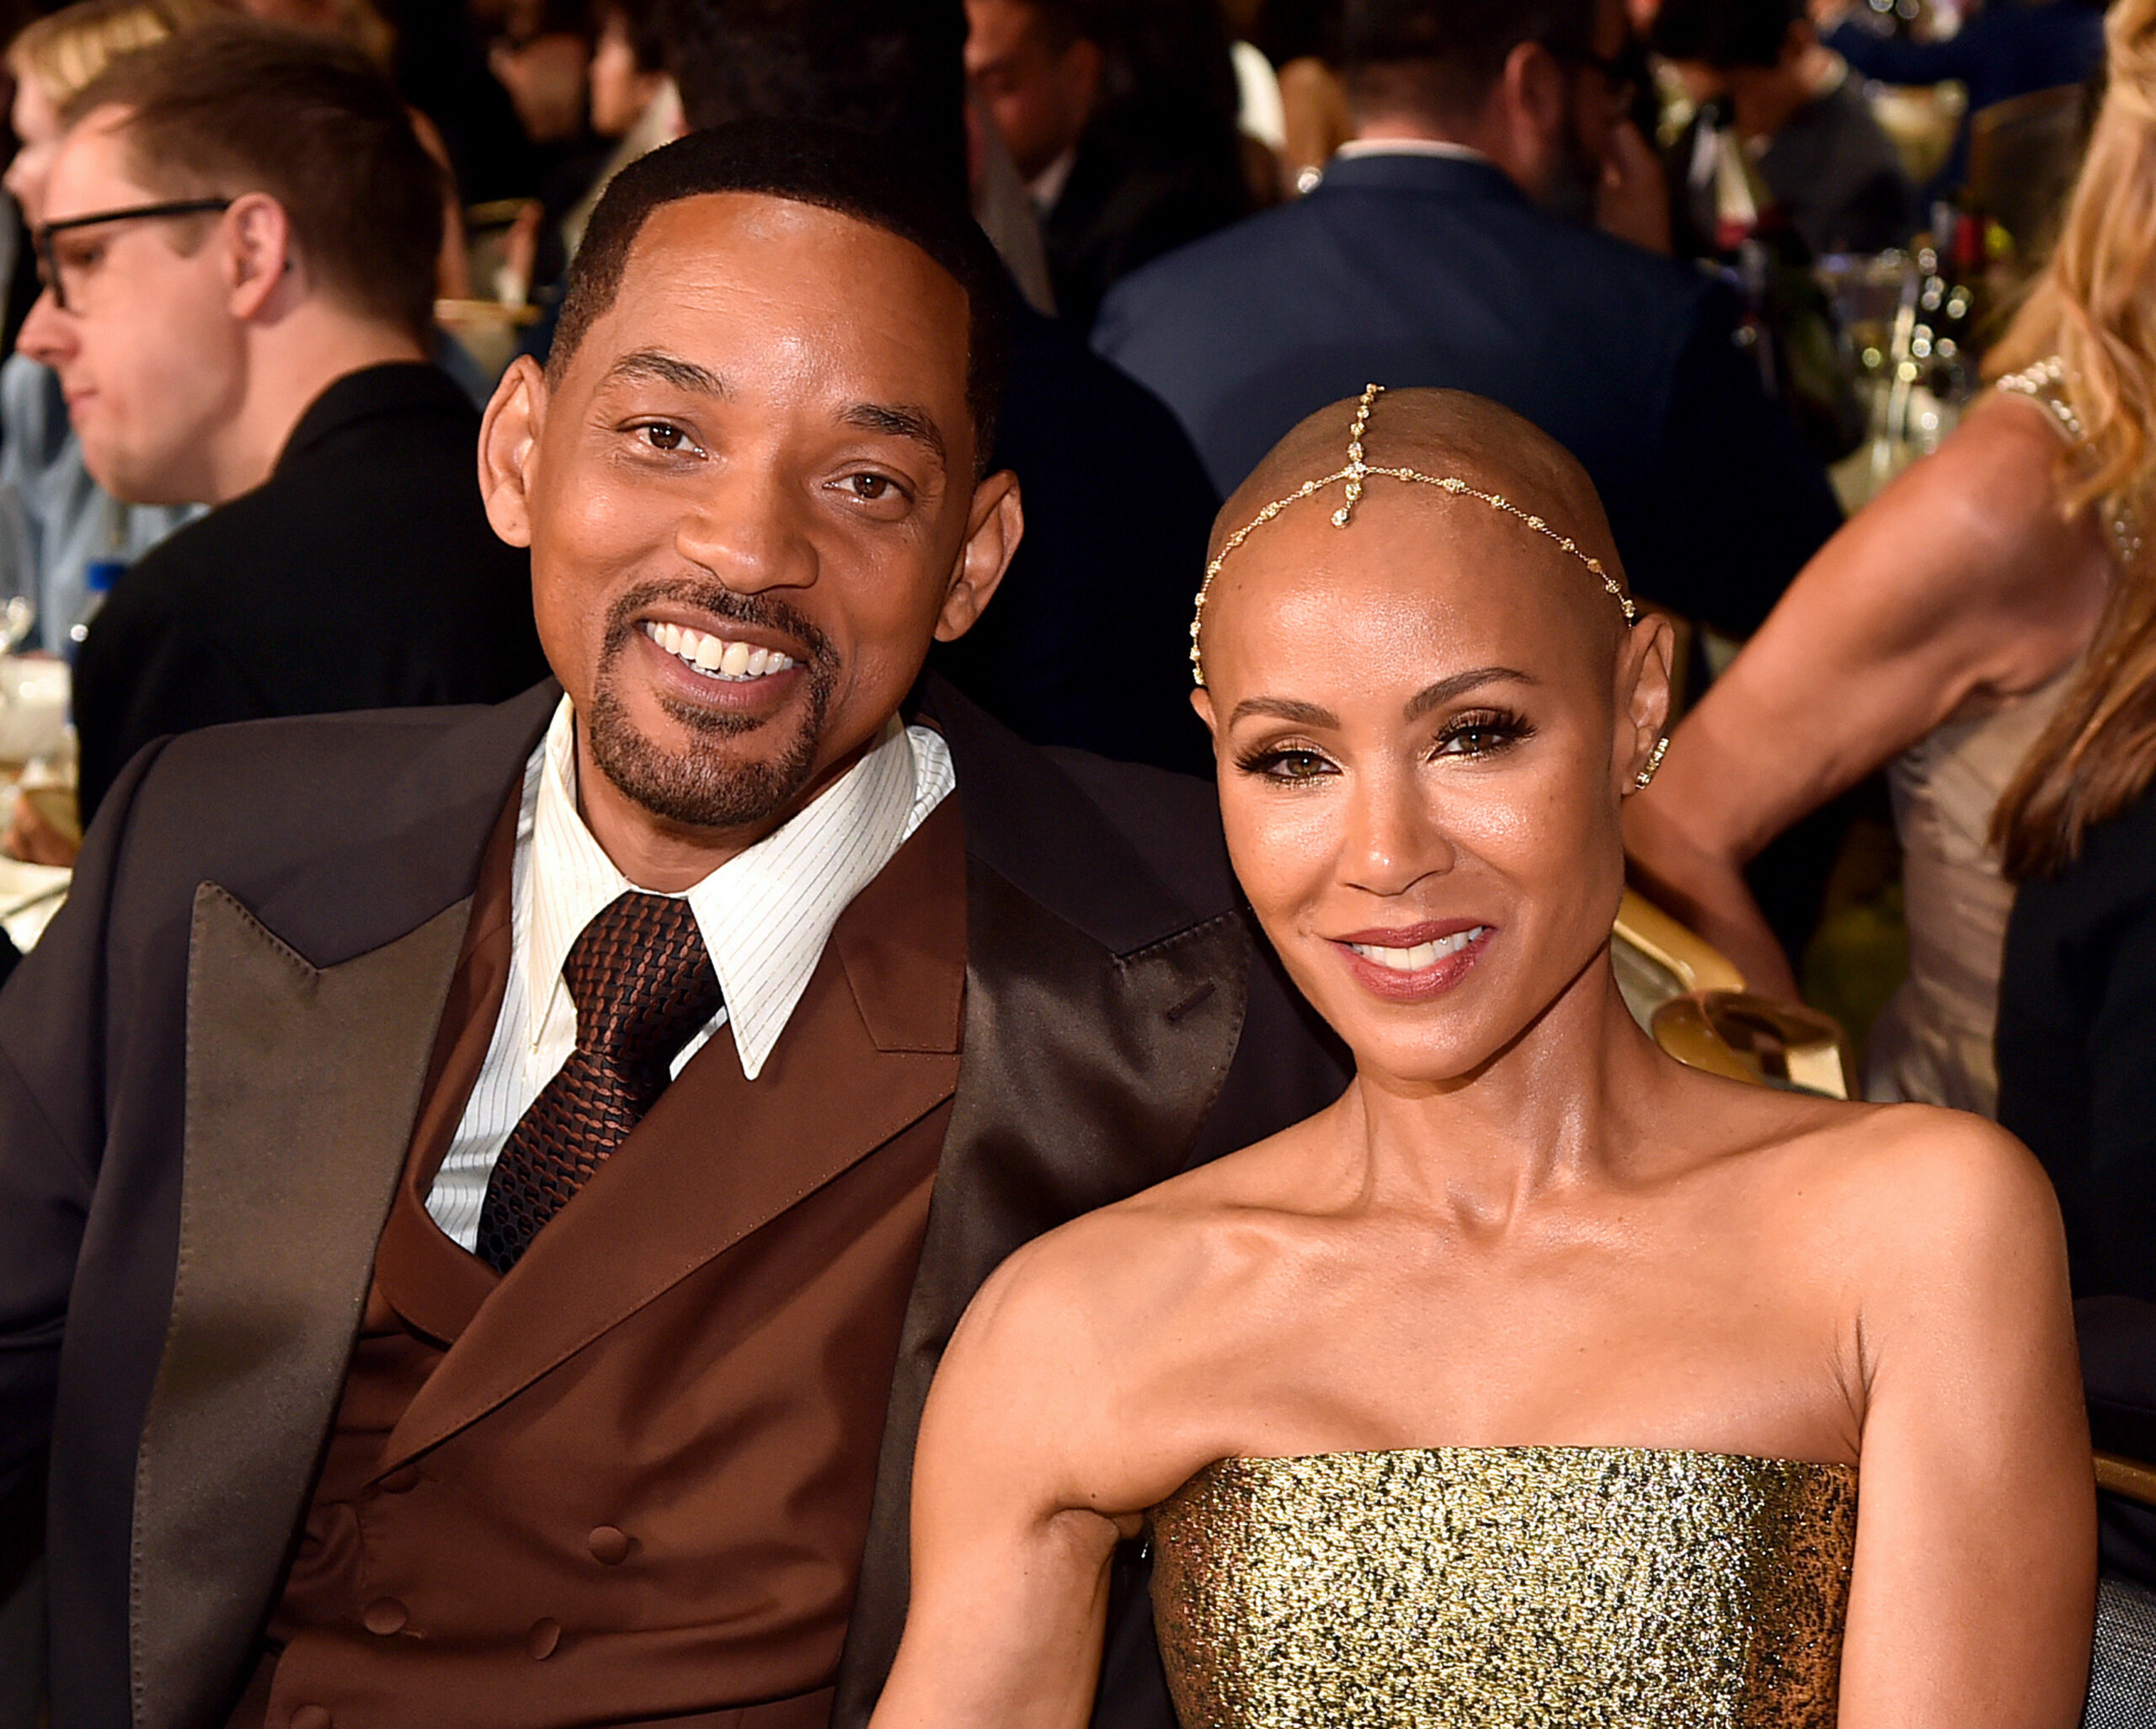 Jada Pinkett Smith aims to reconcile with Will despite separation.